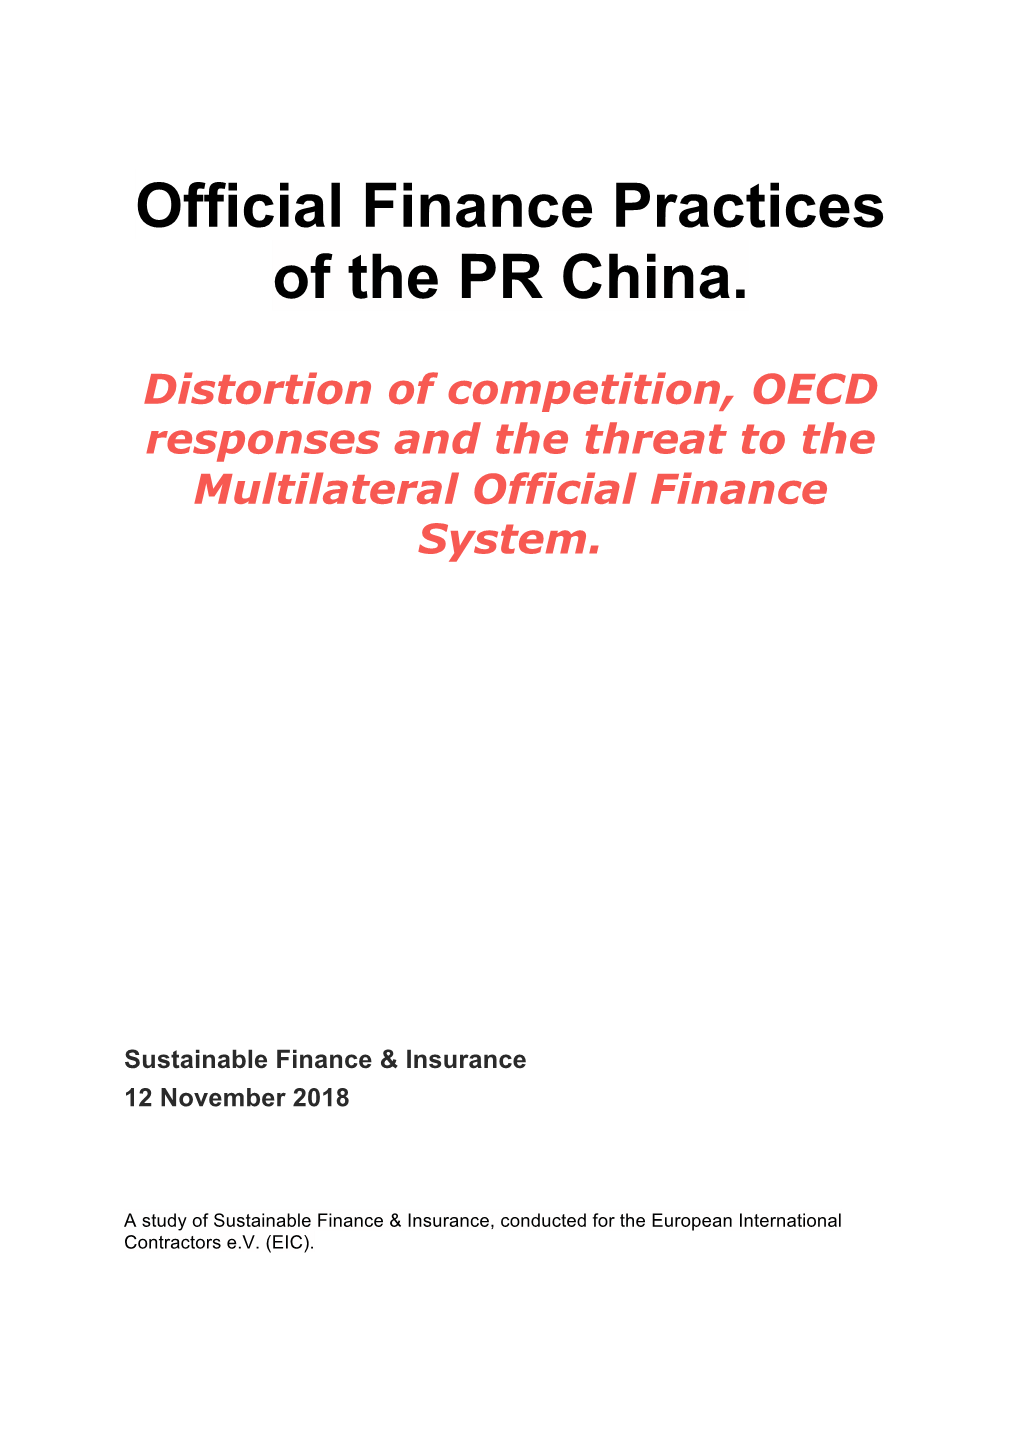 Official Finance Practices of the PR China